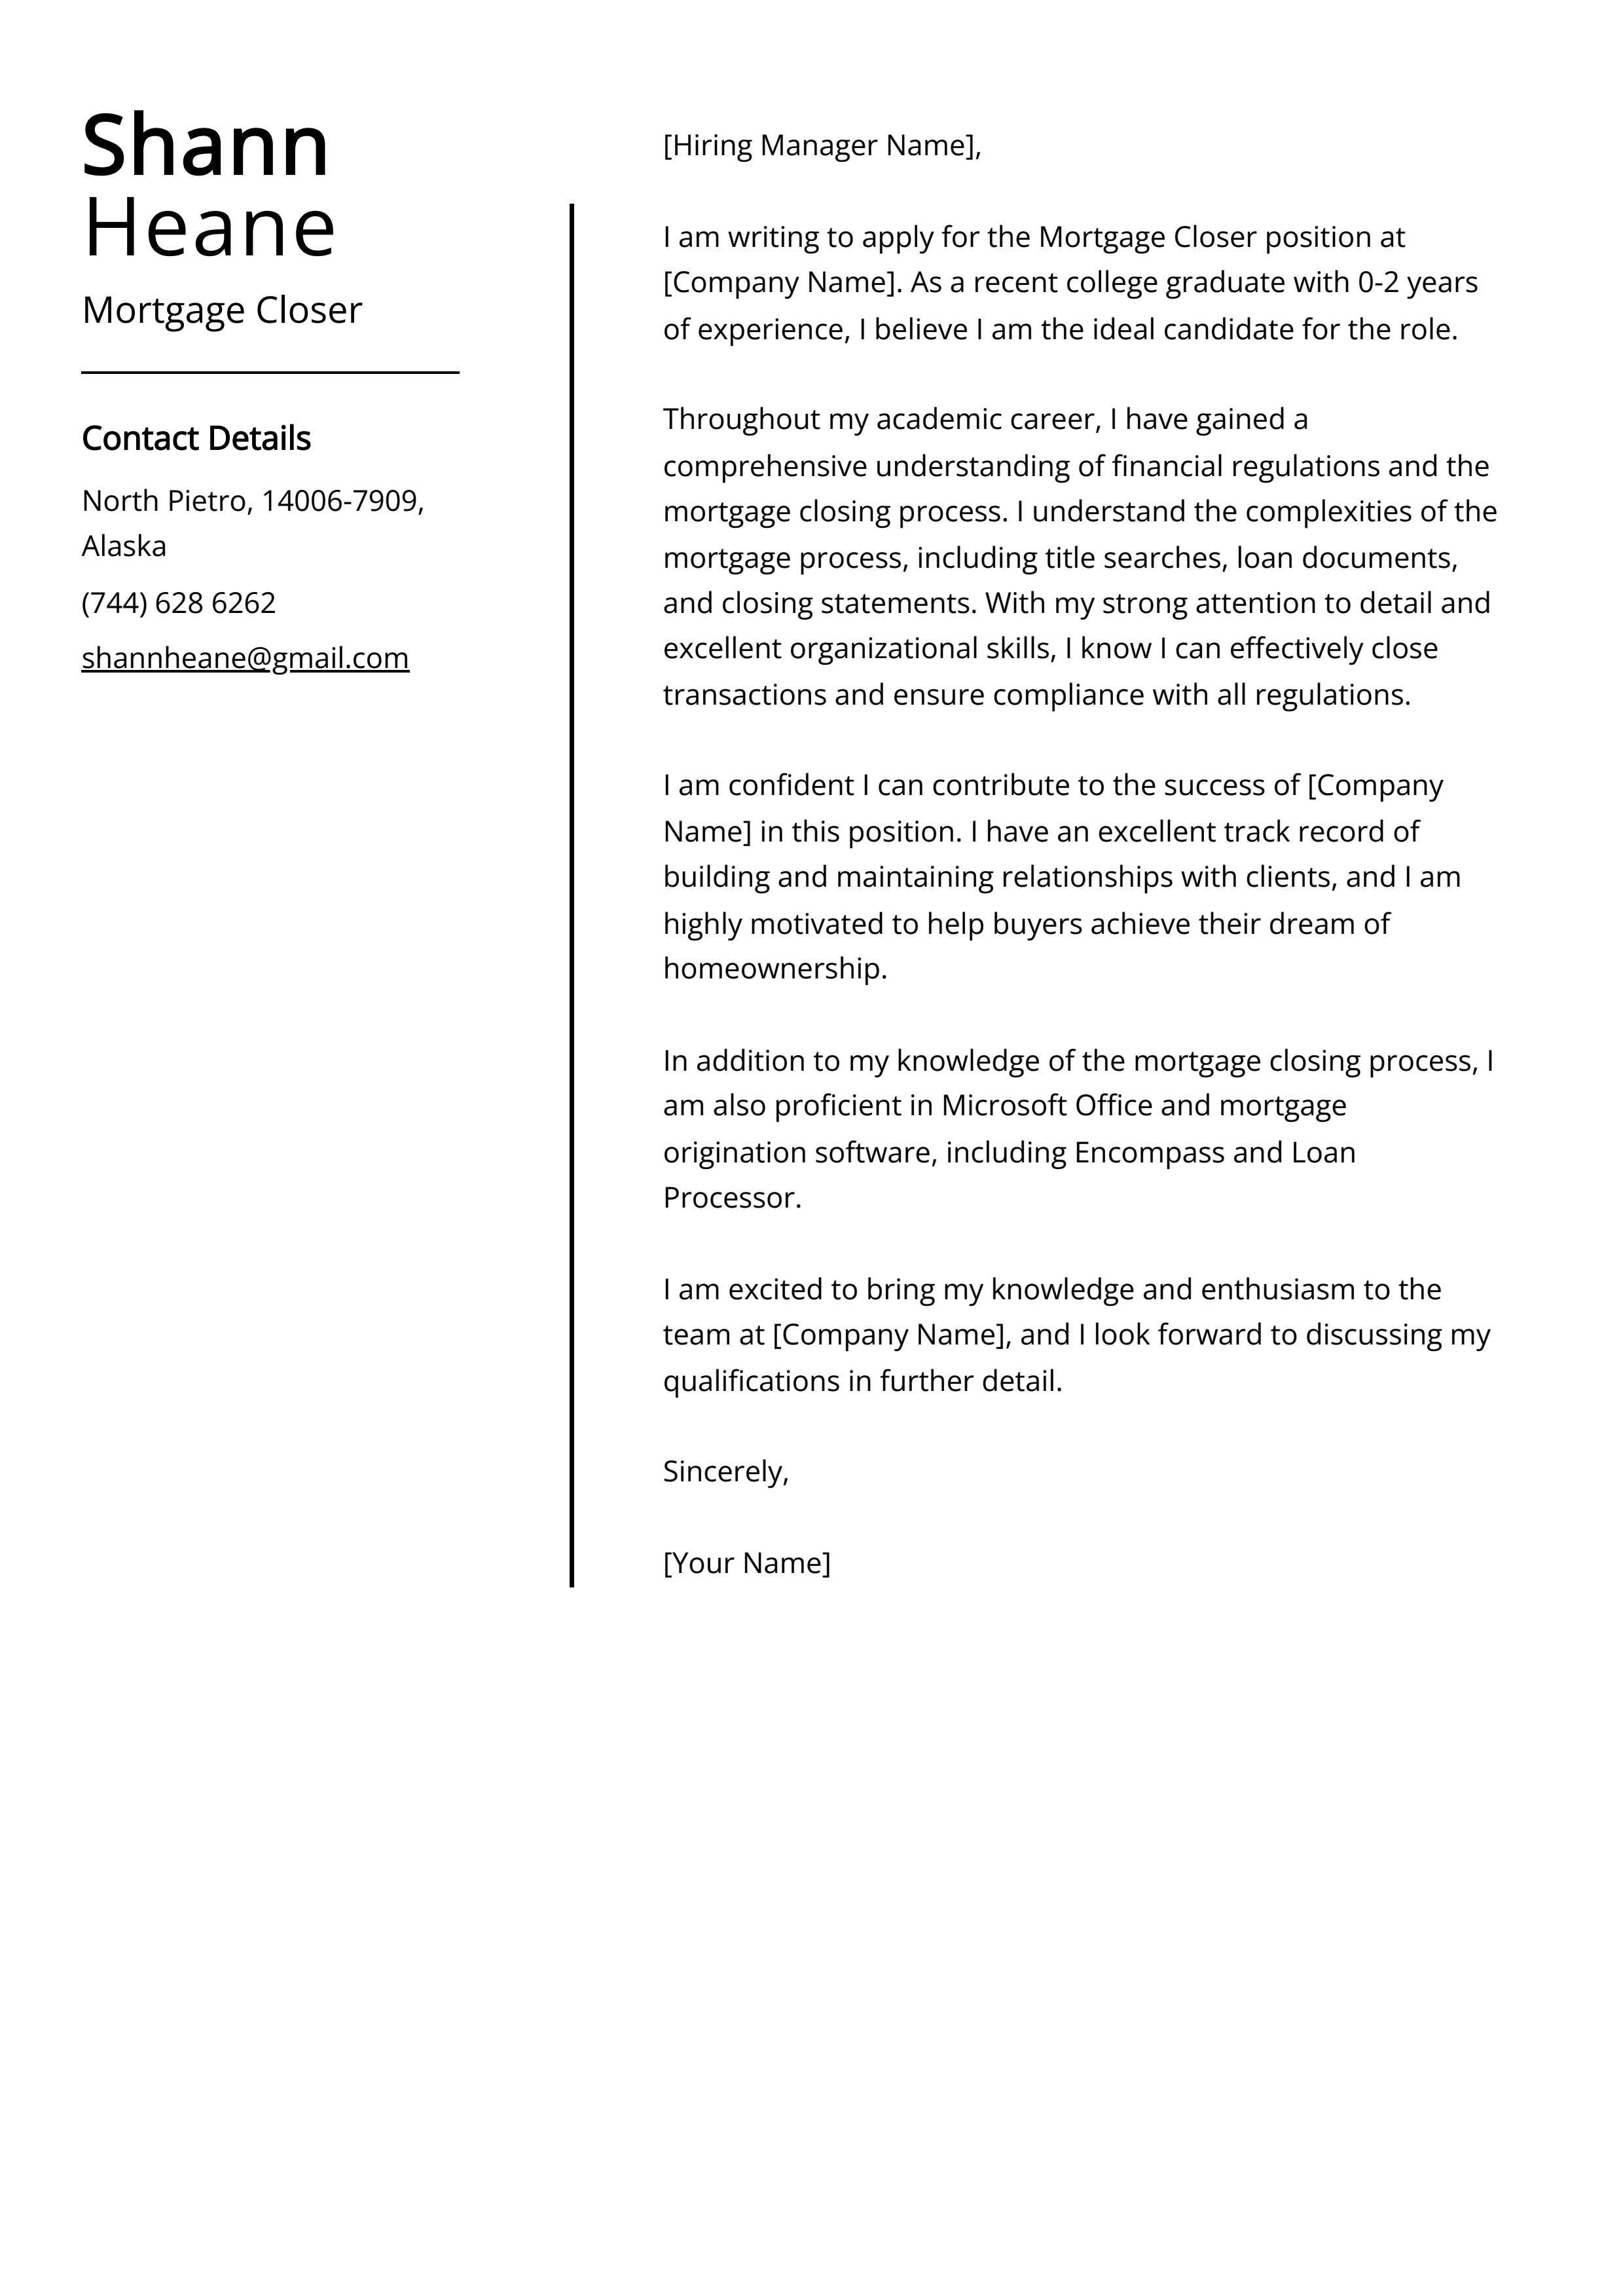 Mortgage Closer Cover Letter Example